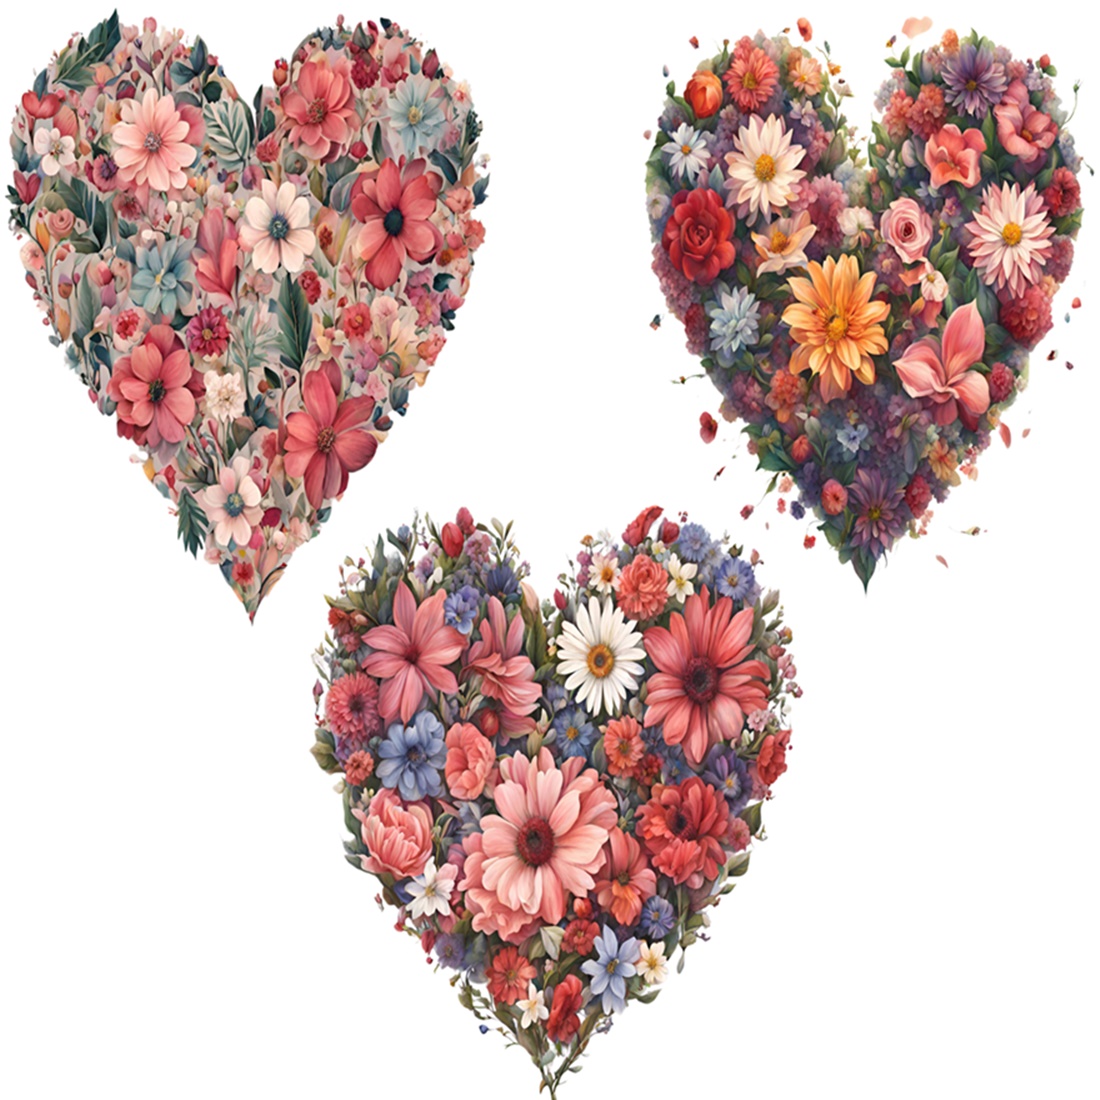 Watercolor Flower Heart clipart, Watercolor Valentine's heart, Valentine's Day PNG, Floral hearts png, Heart Flowers, 17 PNG, Commercial use preview image.